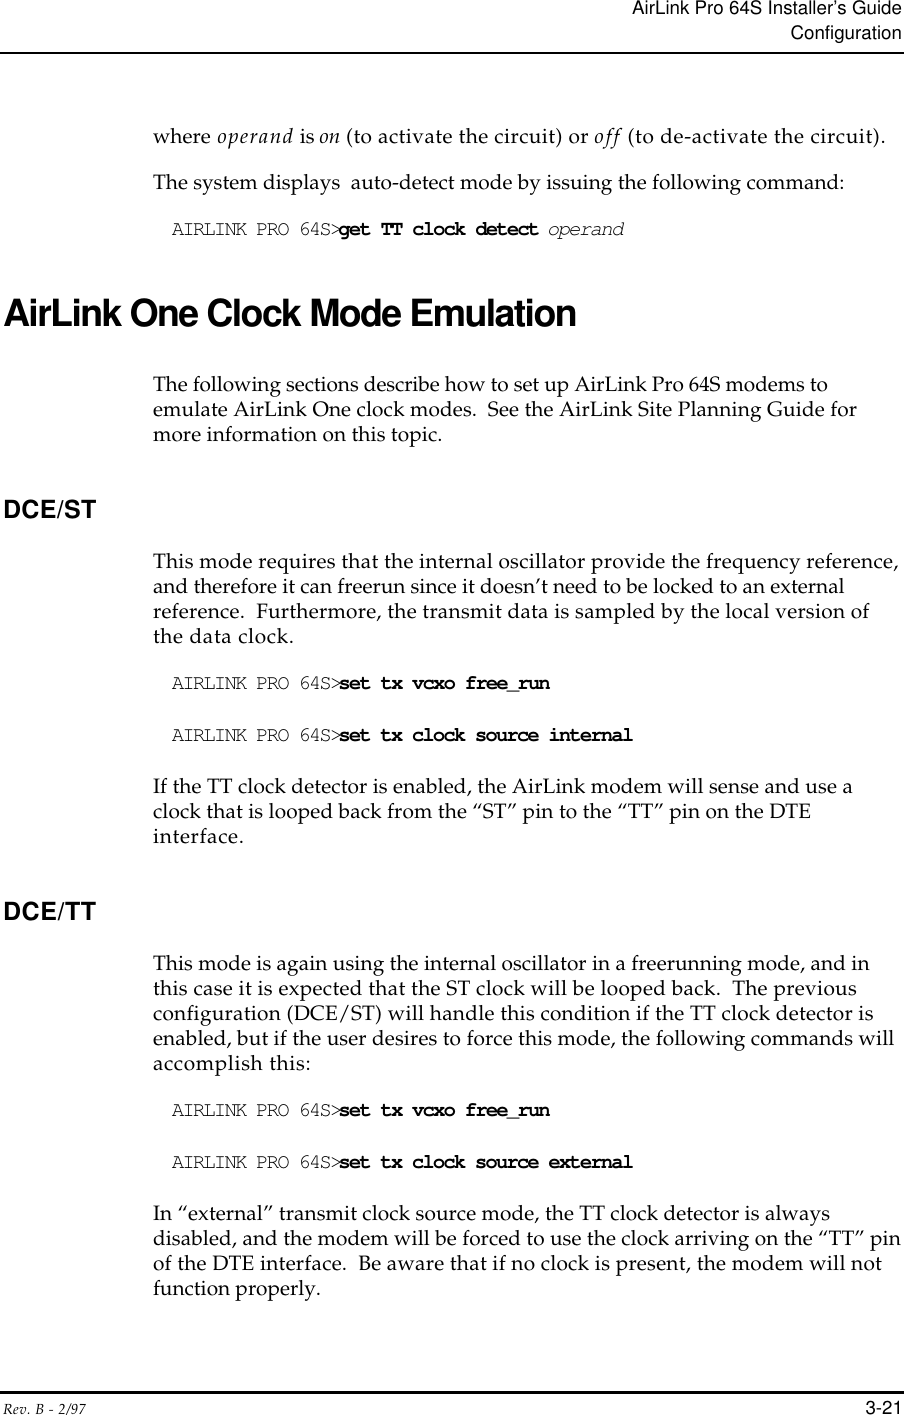 AirLink Pro 64S Installer’s GuideConfigurationRev. B - 2/97 3-21where operand is on (to activate the circuit) or off (to de-activate the circuit).The system displays  auto-detect mode by issuing the following command:AIRLINK PRO 64S&gt;get TT clock detect operandAirLink One Clock Mode EmulationThe following sections describe how to set up AirLink Pro 64S modems toemulate AirLink One clock modes.  See the AirLink Site Planning Guide formore information on this topic.DCE/STThis mode requires that the internal oscillator provide the frequency reference,and therefore it can freerun since it doesn’t need to be locked to an externalreference.  Furthermore, the transmit data is sampled by the local version ofthe data clock.AIRLINK PRO 64S&gt;set tx vcxo free_runAIRLINK PRO 64S&gt;set tx clock source internalIf the TT clock detector is enabled, the AirLink modem will sense and use aclock that is looped back from the “ST” pin to the “TT” pin on the DTEinterface.DCE/TTThis mode is again using the internal oscillator in a freerunning mode, and inthis case it is expected that the ST clock will be looped back.  The previousconfiguration (DCE/ST) will handle this condition if the TT clock detector isenabled, but if the user desires to force this mode, the following commands willaccomplish this:AIRLINK PRO 64S&gt;set tx vcxo free_runAIRLINK PRO 64S&gt;set tx clock source externalIn “external” transmit clock source mode, the TT clock detector is alwaysdisabled, and the modem will be forced to use the clock arriving on the “TT” pinof the DTE interface.  Be aware that if no clock is present, the modem will notfunction properly.